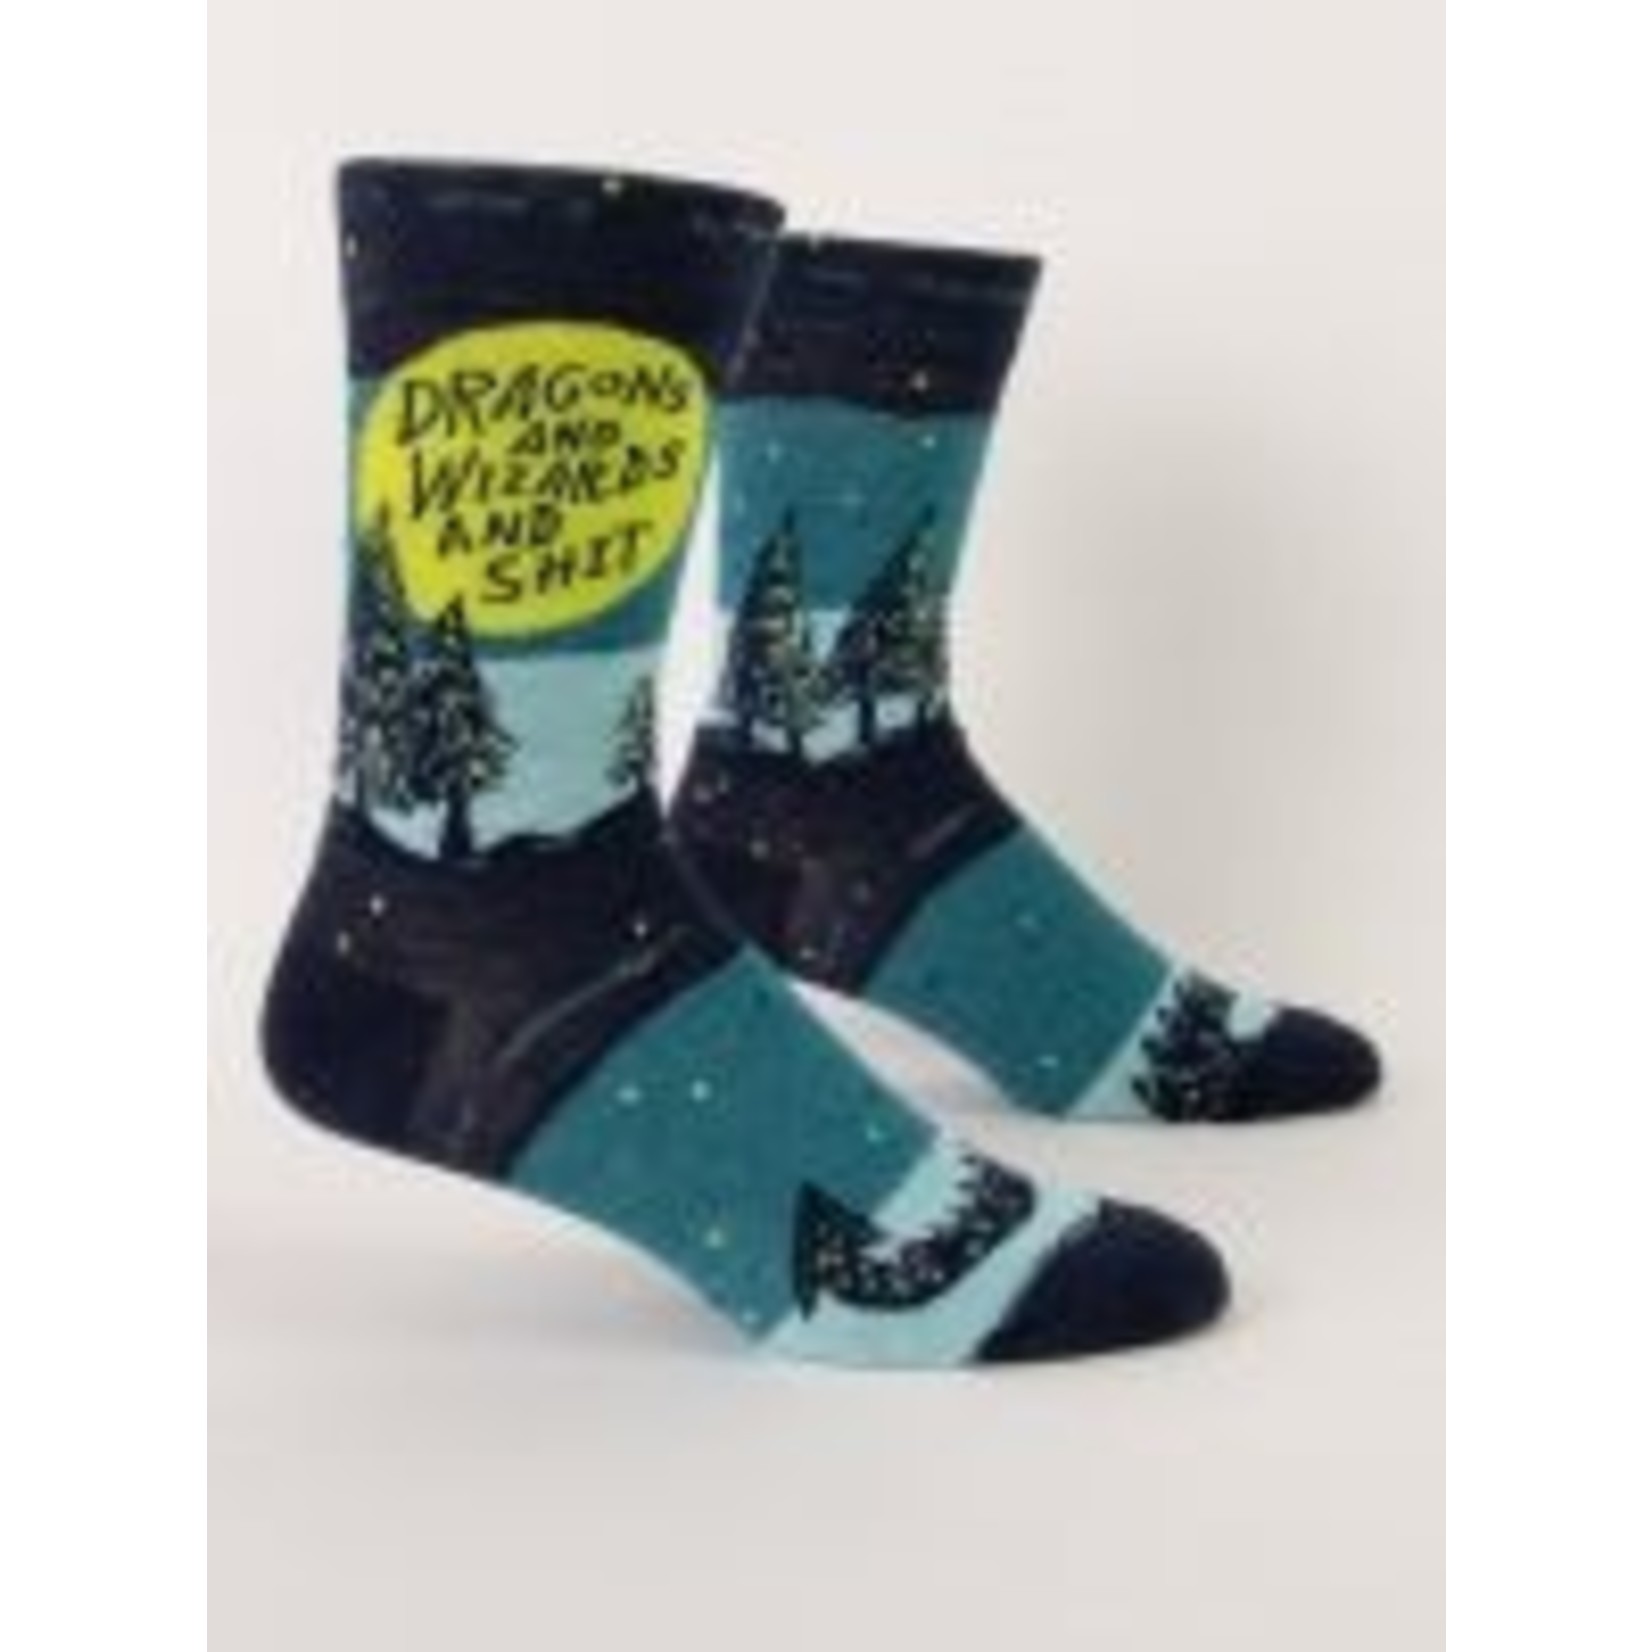 Blue Q Dragons and Wizards and Shit M-Crew Socks